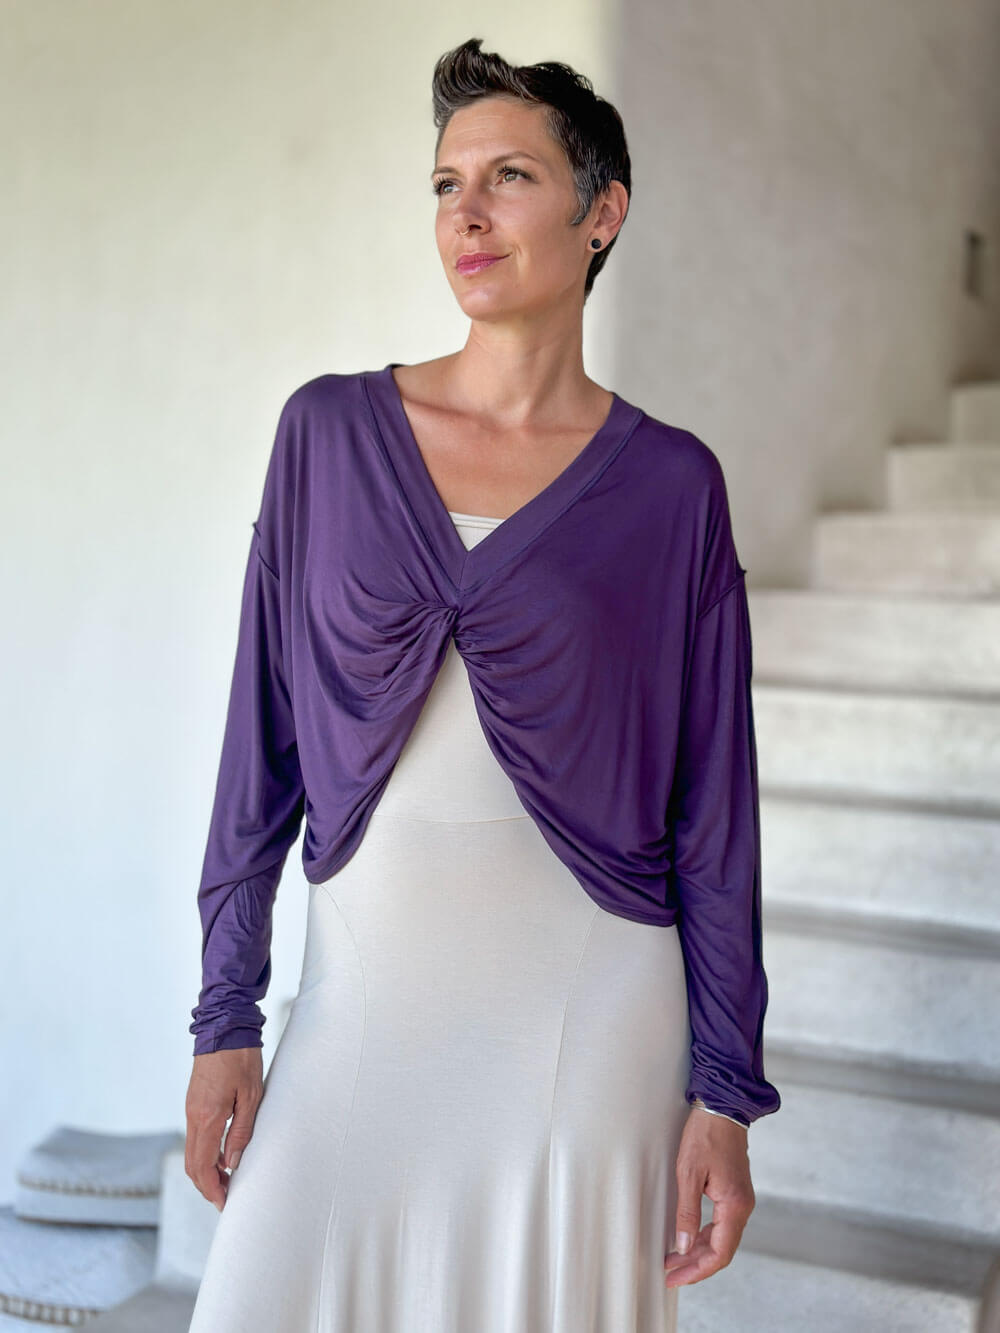 caraucci lightweight plant-based-rayon jersey purple reversible long sleeve knot front shrug top #color_plum